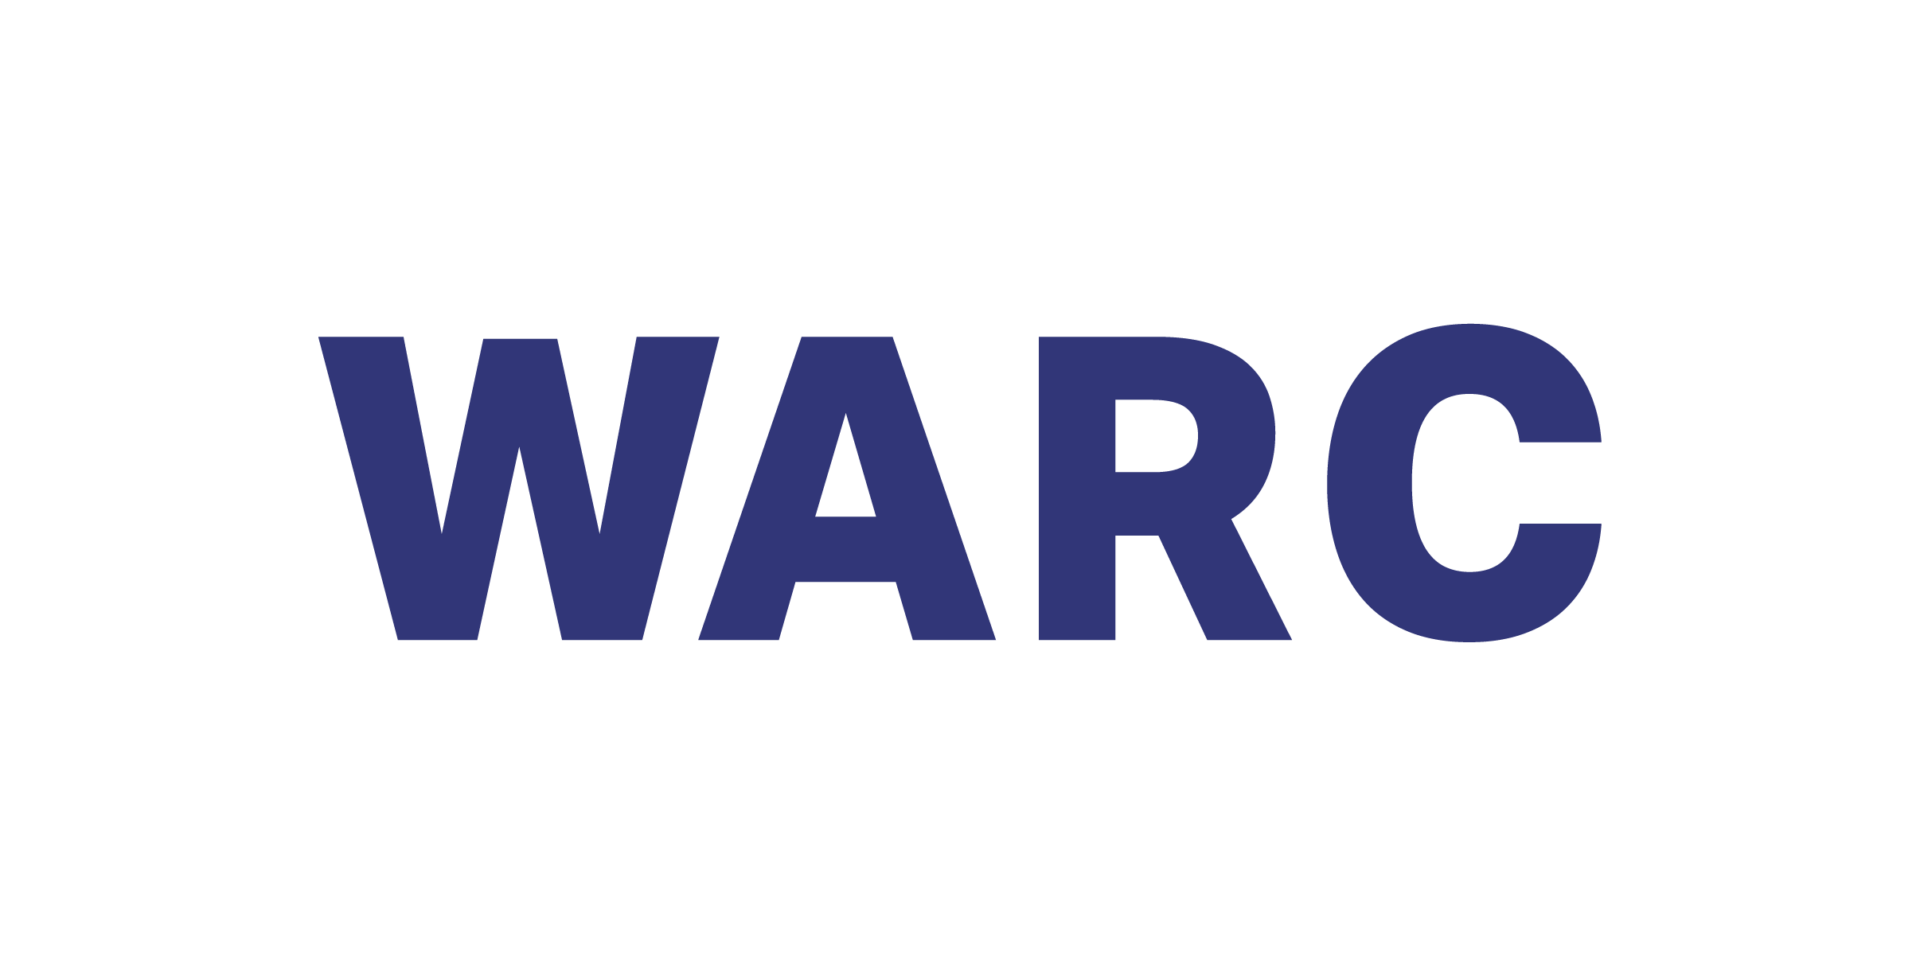 WARC, Quantifying the ‘grey areas’ in advertising